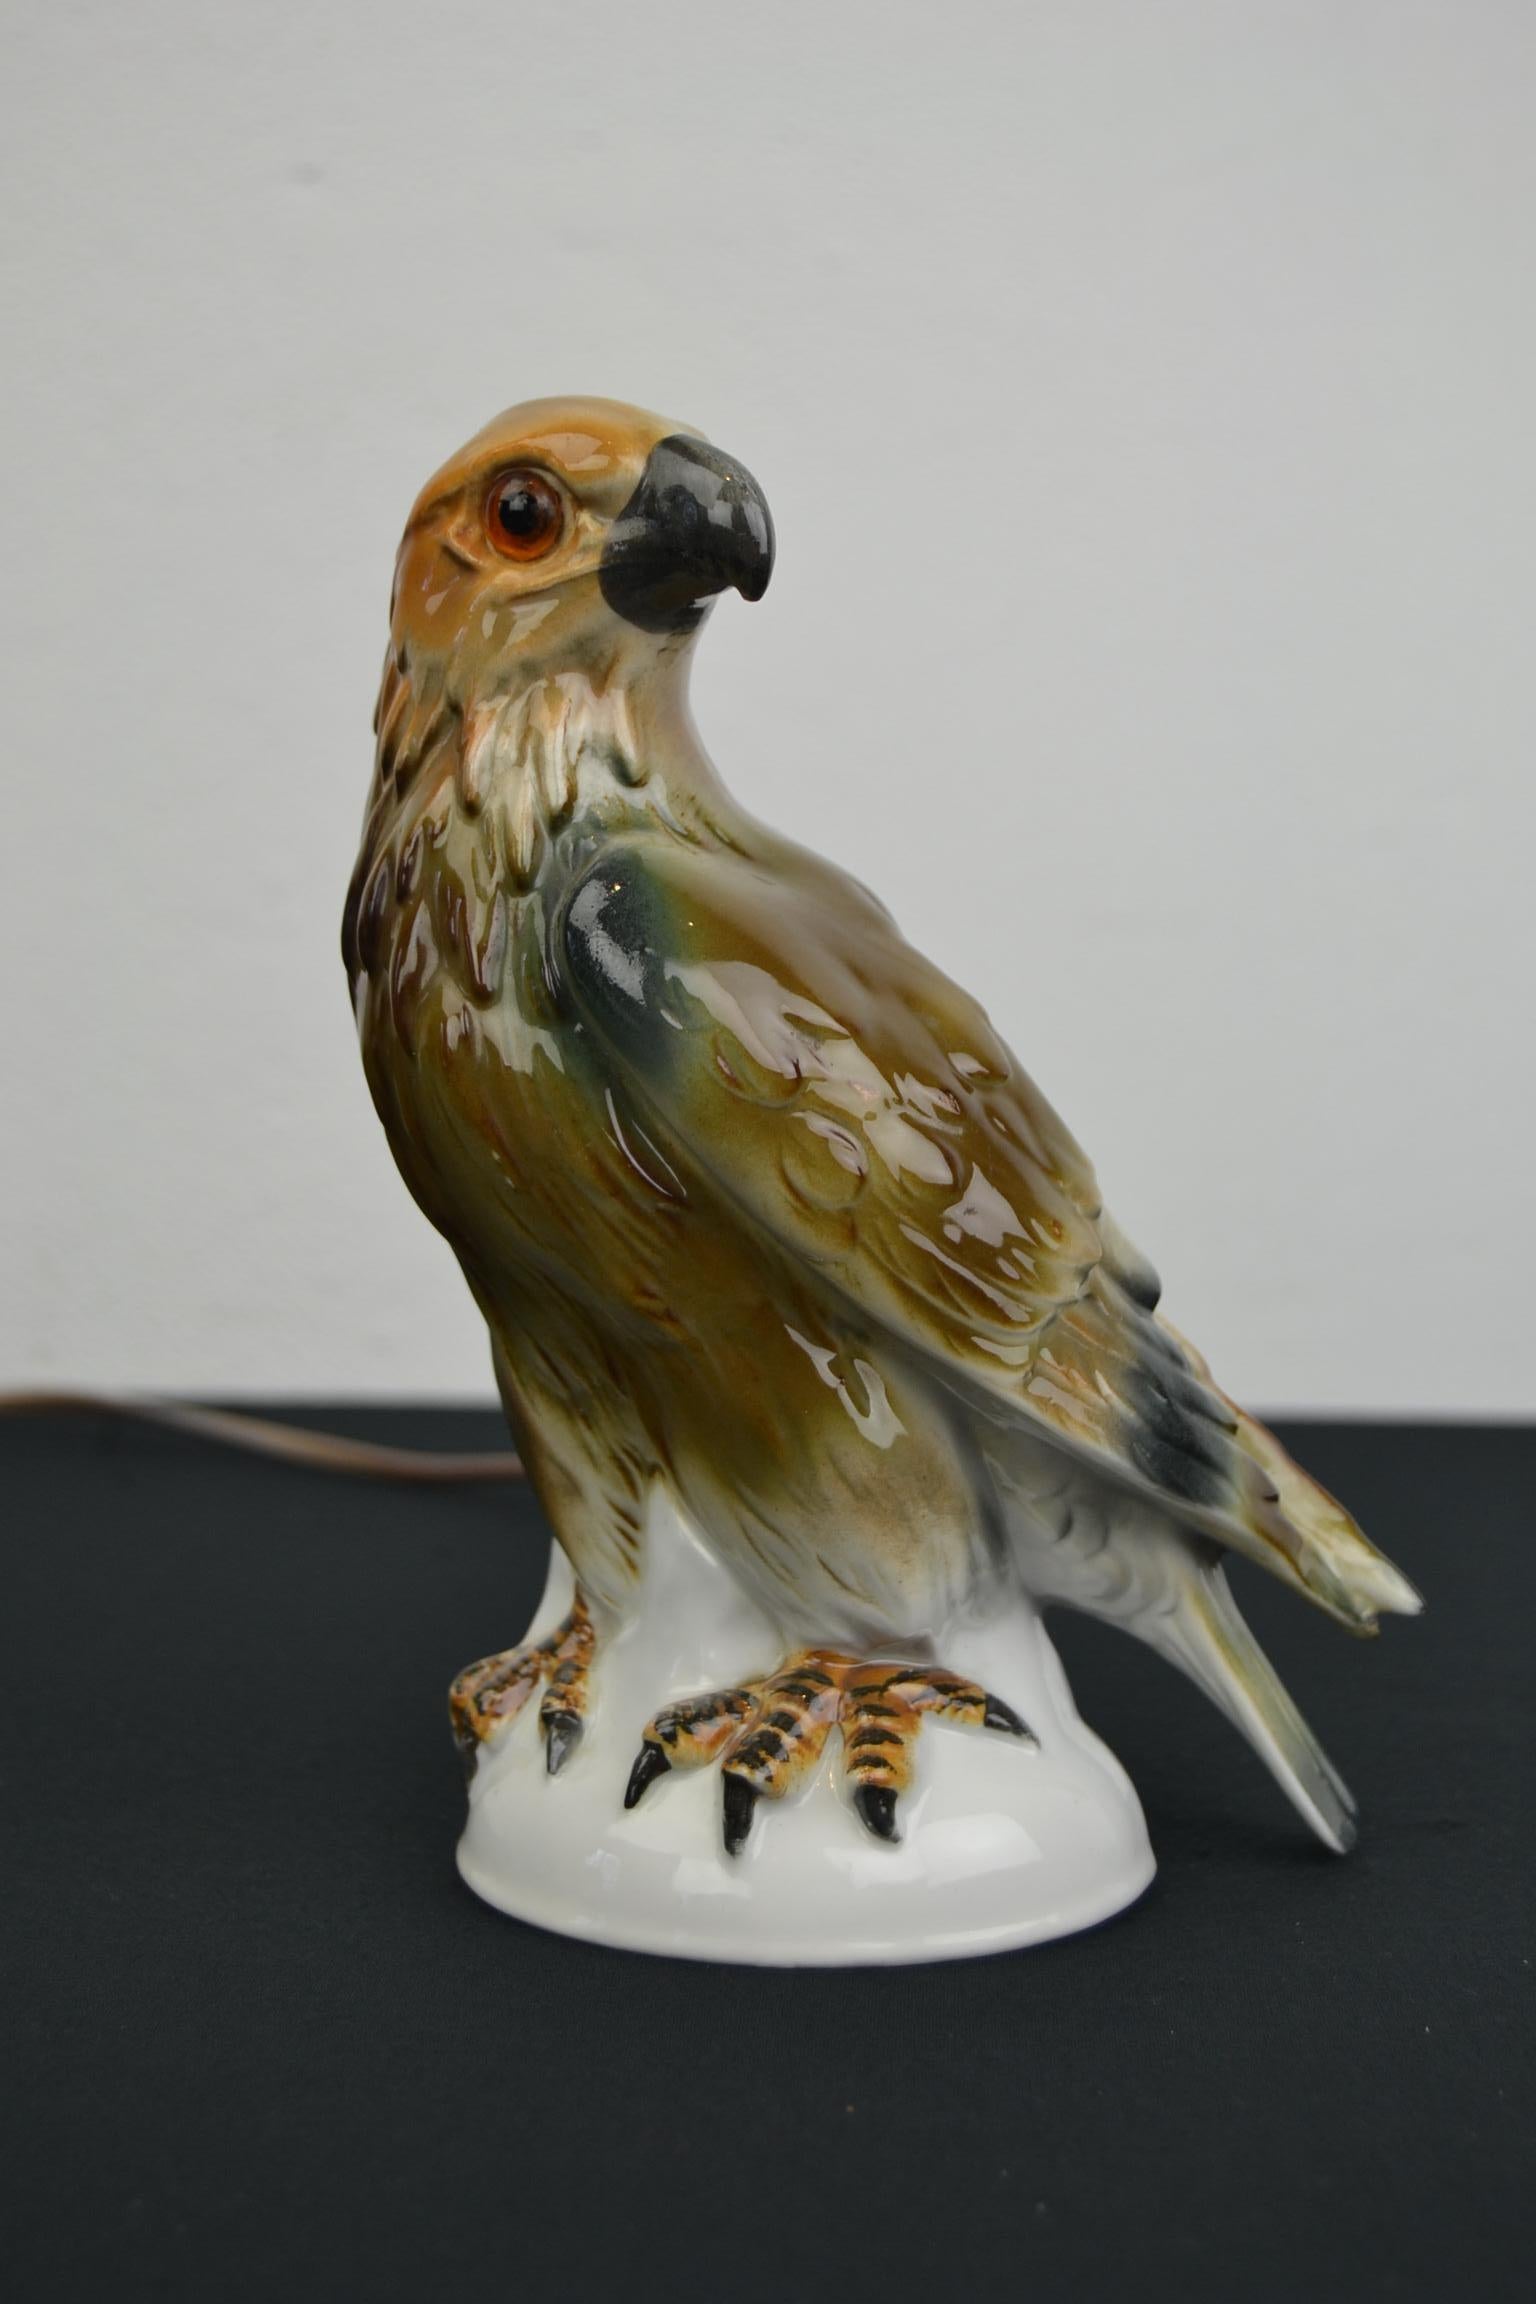 Great looking perfume lamp in the shape of an eagle bird. 
A perfume lamp of a porcelain eagle sculpture with glass eyes.
This animal statue, animal light, bird lamp dates from the Art Deco period where great colors were used.
It's a little table